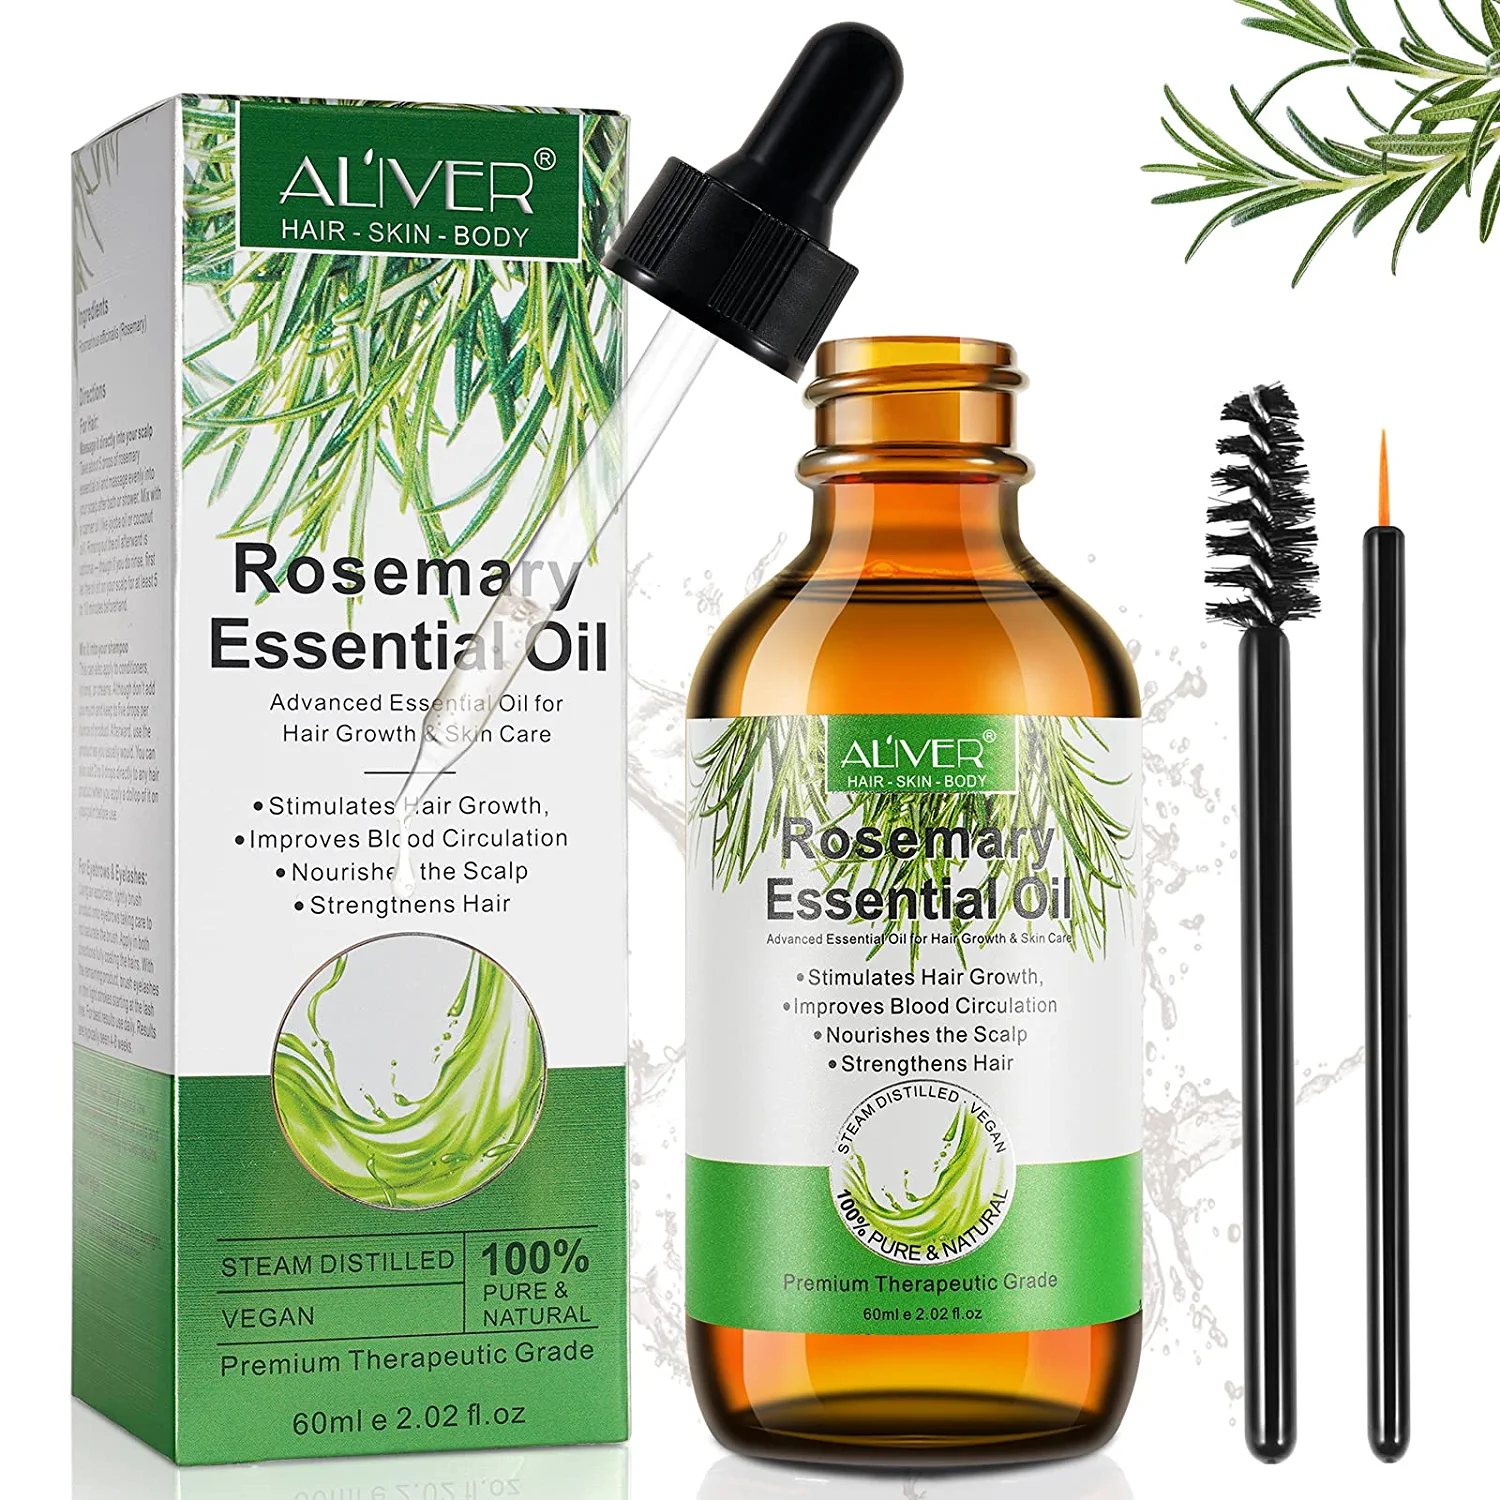 plobrt Rosemary Oil Hair 60 ml, Rosemary Oil for Hair, Rosemary Oil Stimulates Hair Growth, Strengthens the Hair, Sews the Skin, Rosemary Oil Organic for the Growth of Eyebrows and Eyelashes, Aromatherapy